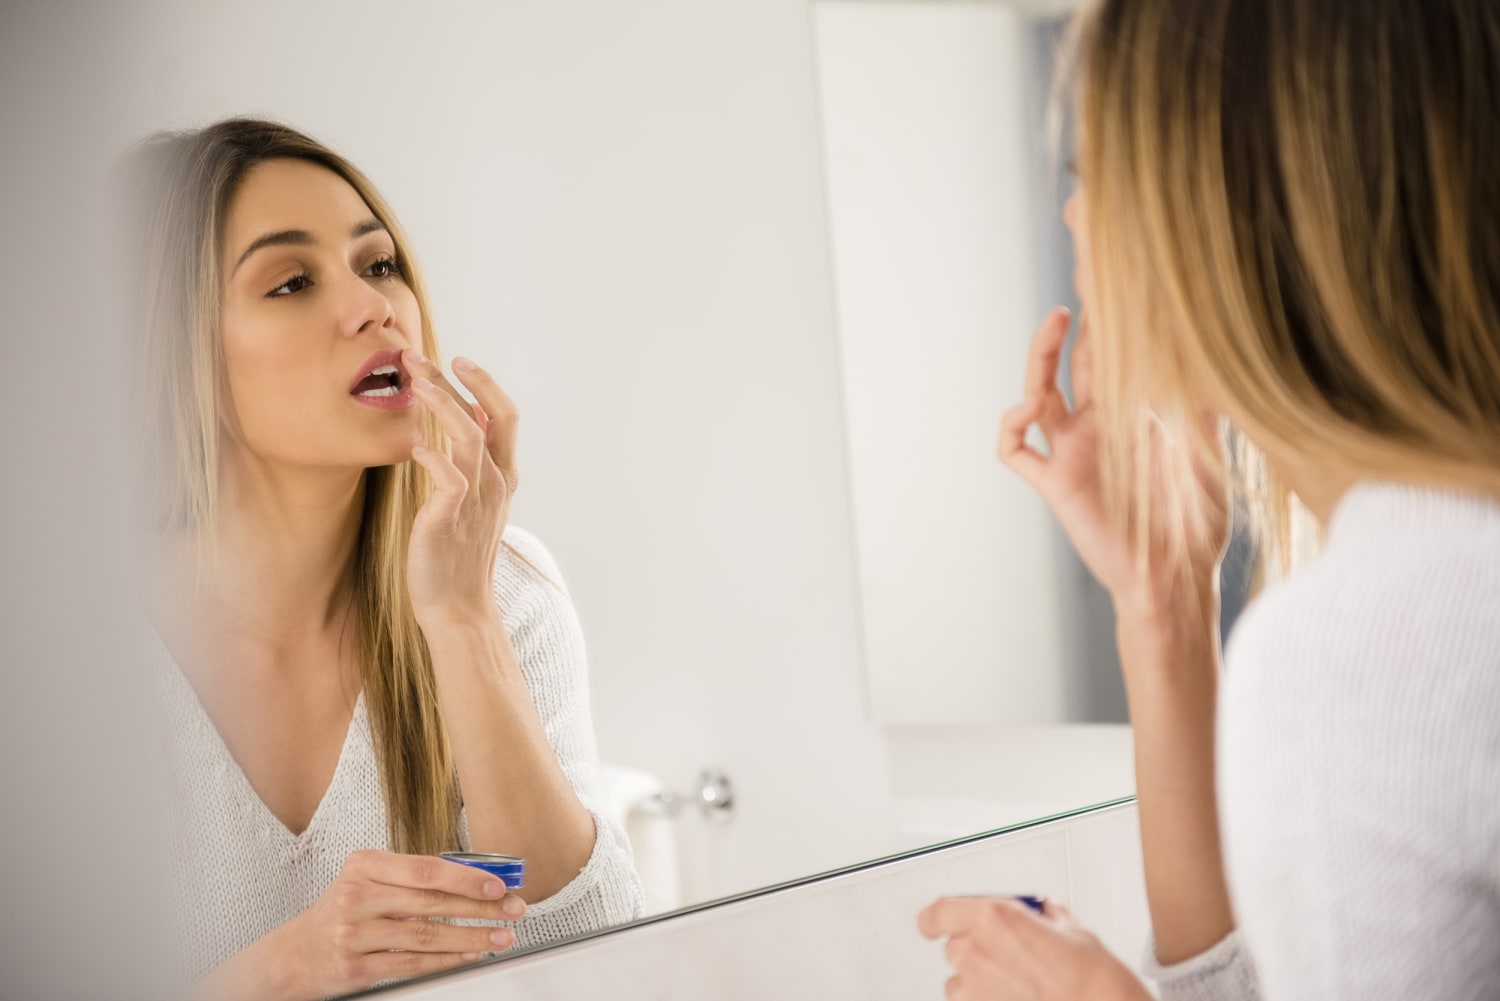 How to heal dry, chapped lips, according to dermatologists